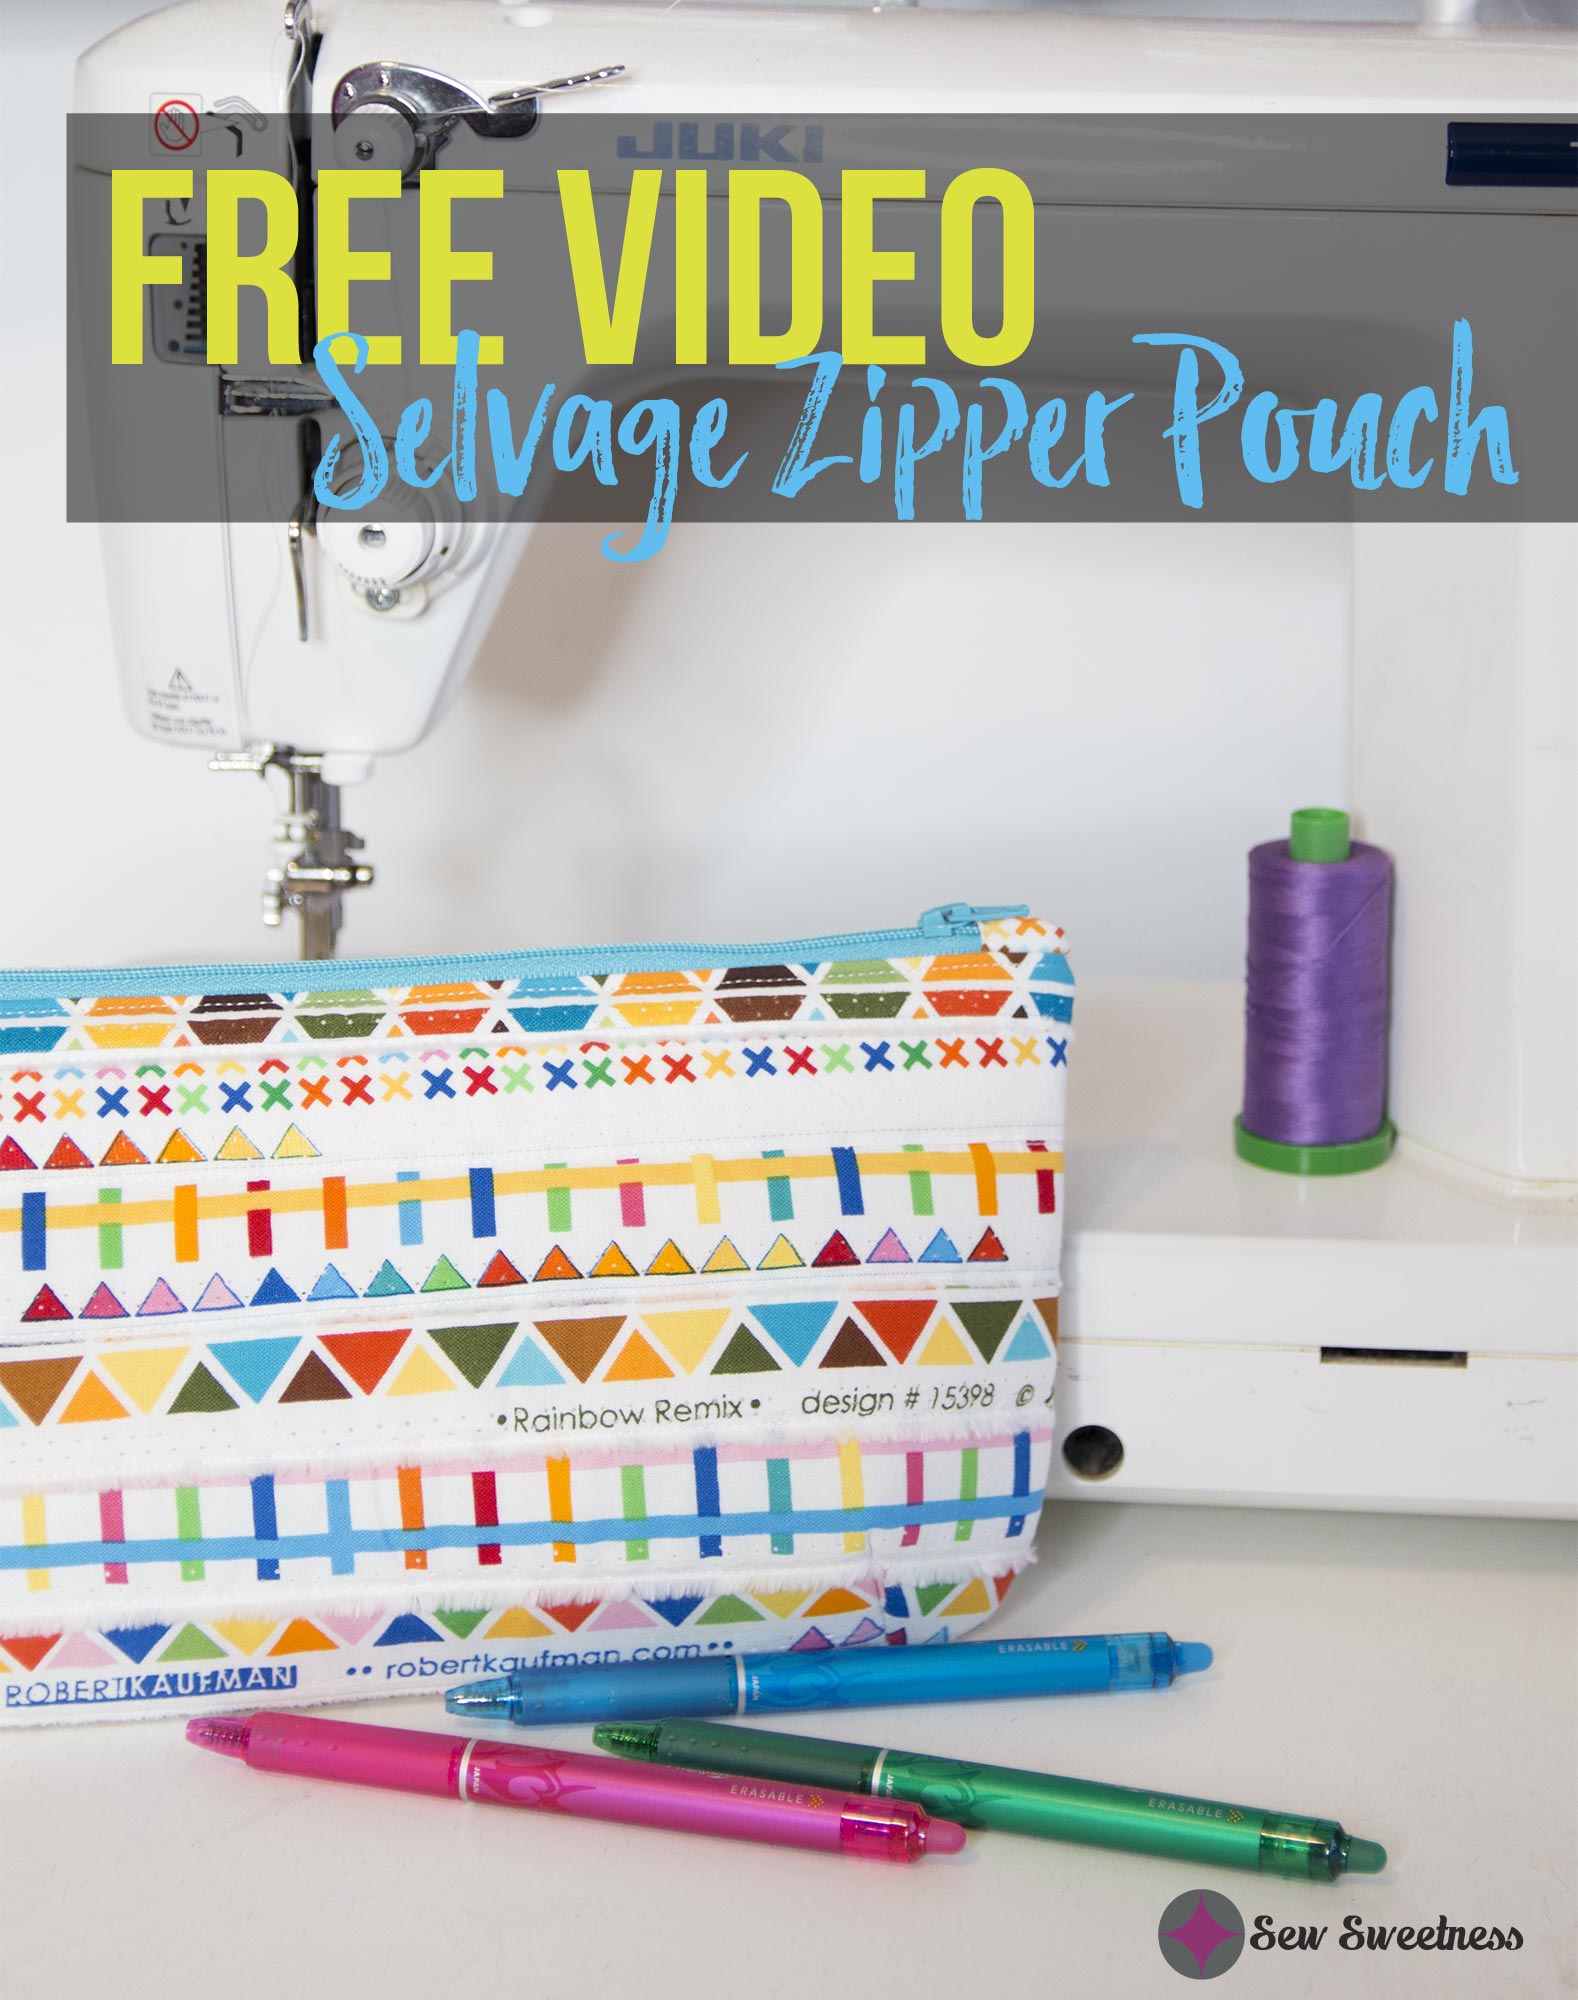 FREE VIDEO: Selvage Zipper Pouch